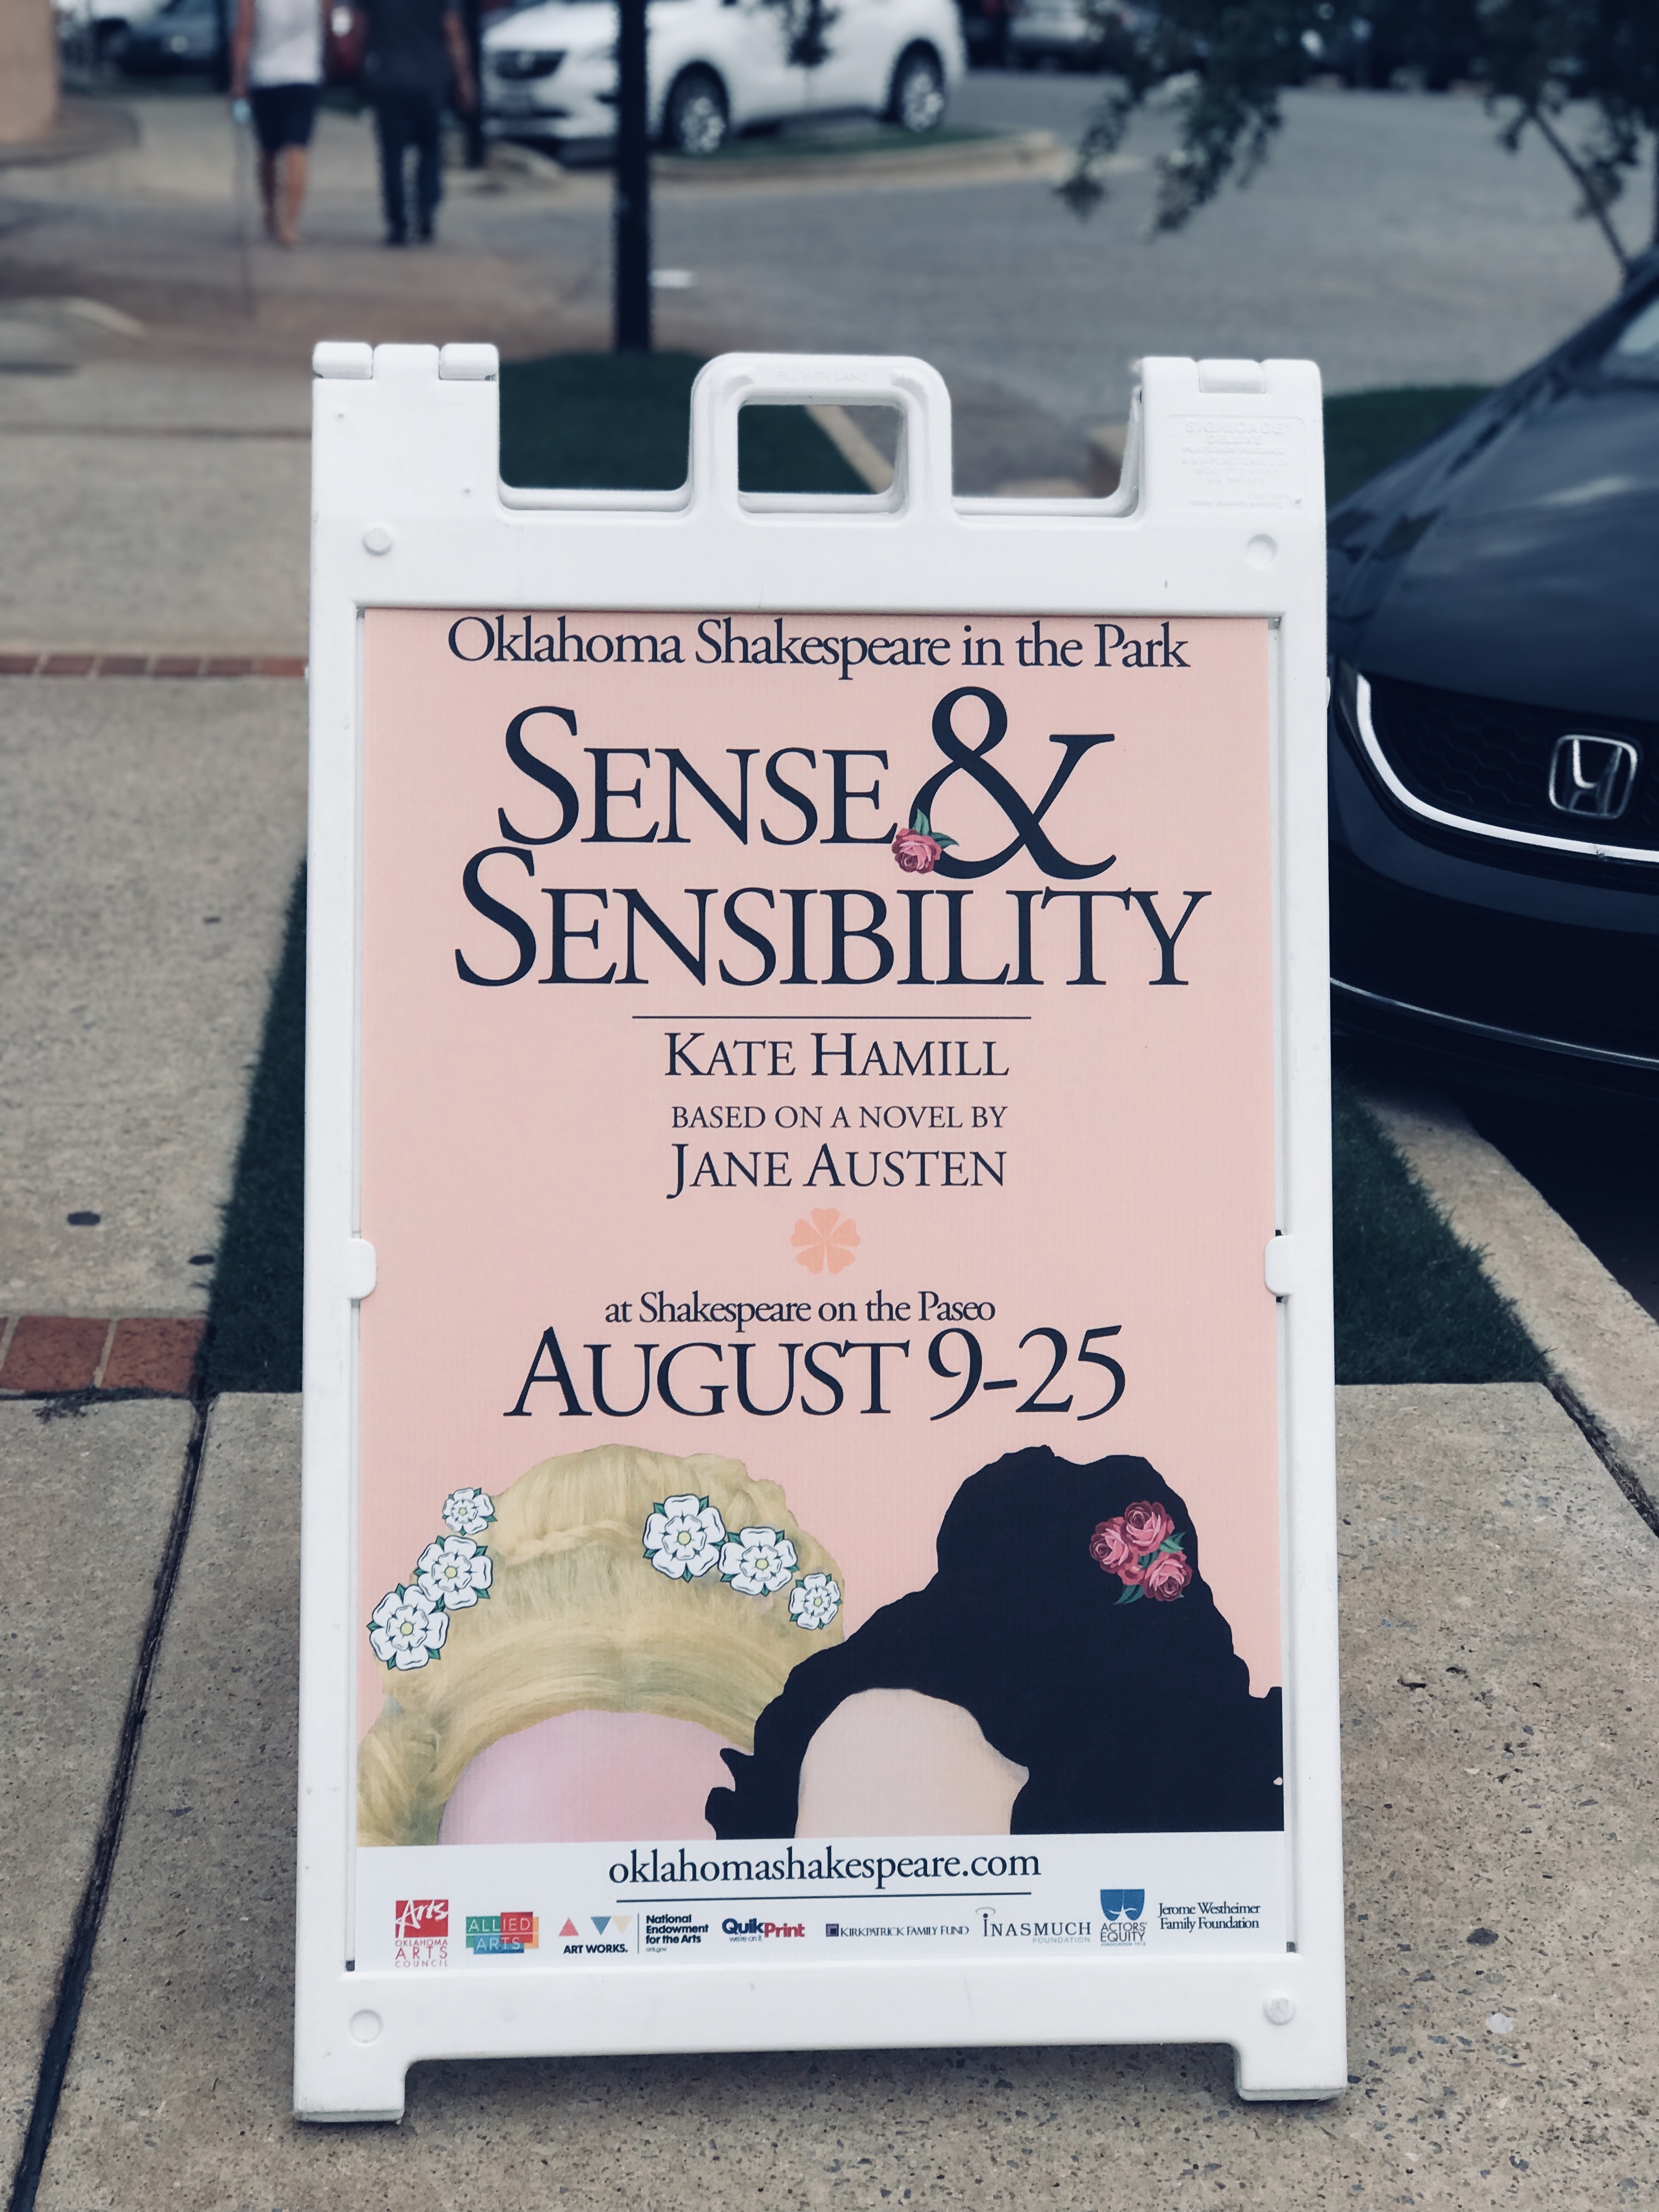 Shakespearian Sense & Sensibility Date Night! Our experience gift double date dinner & theater outing with date ideas! KimTurnerMcCulley.com